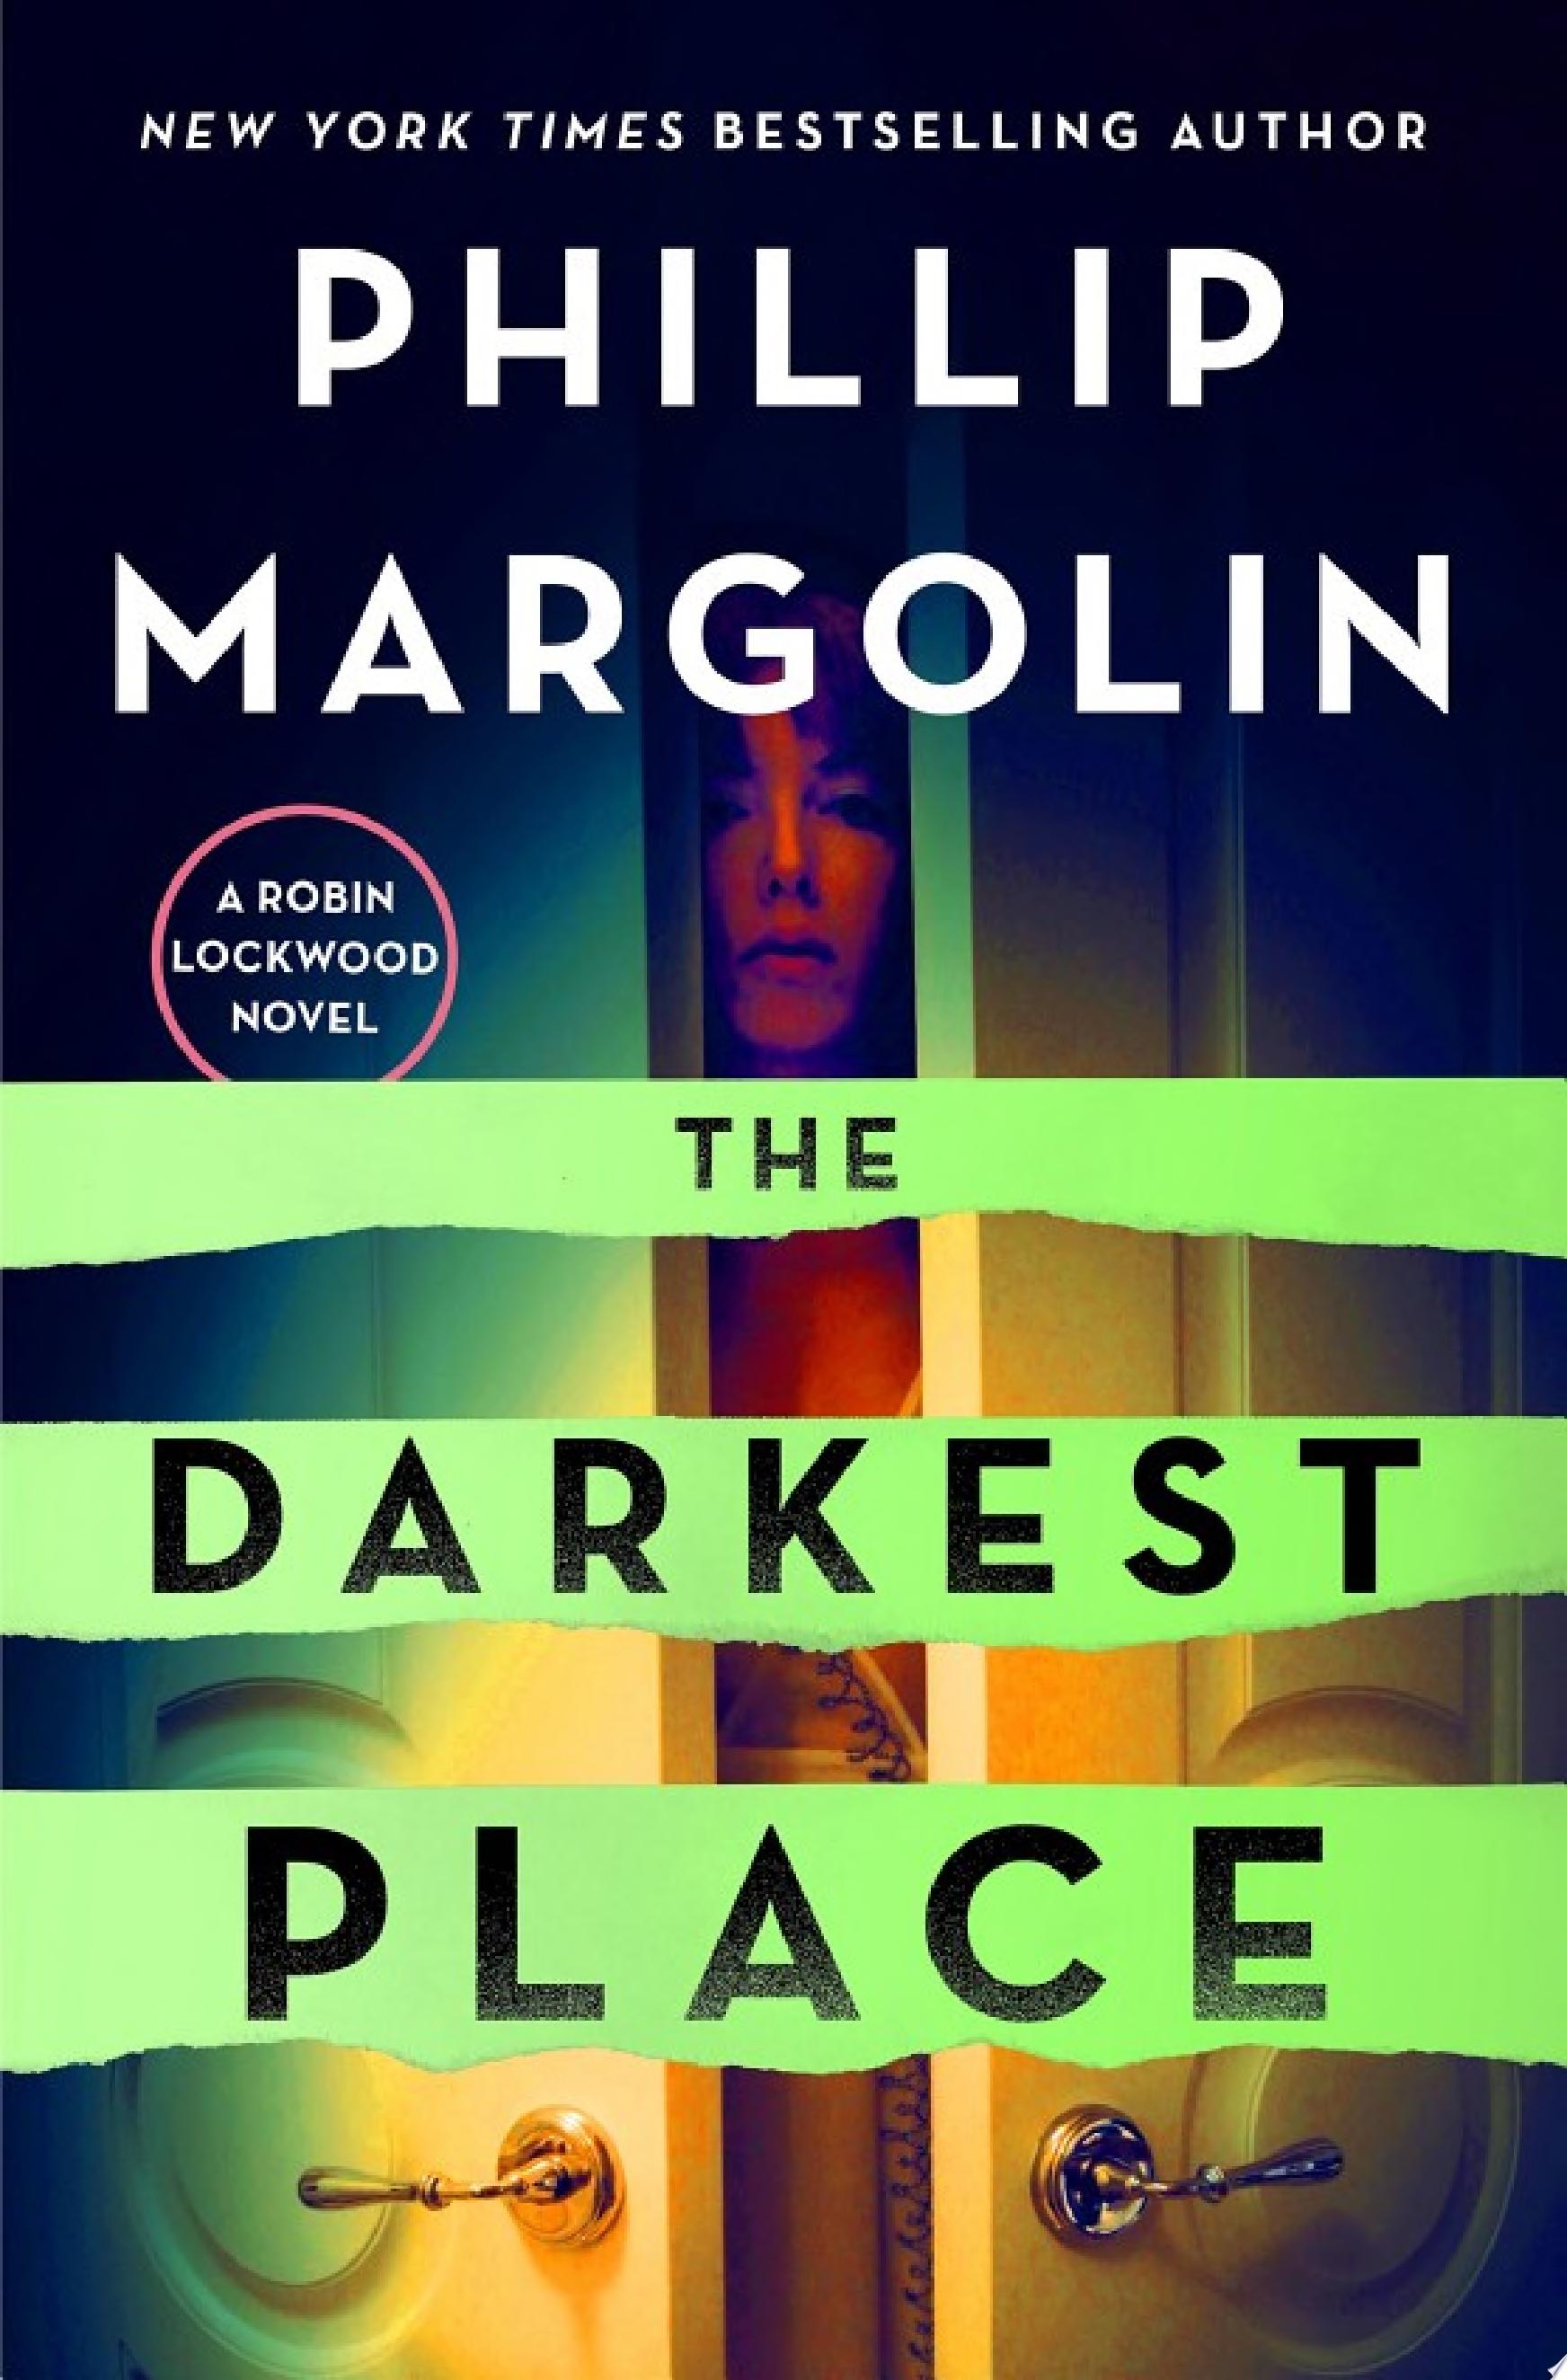 Image for "The Darkest Place"